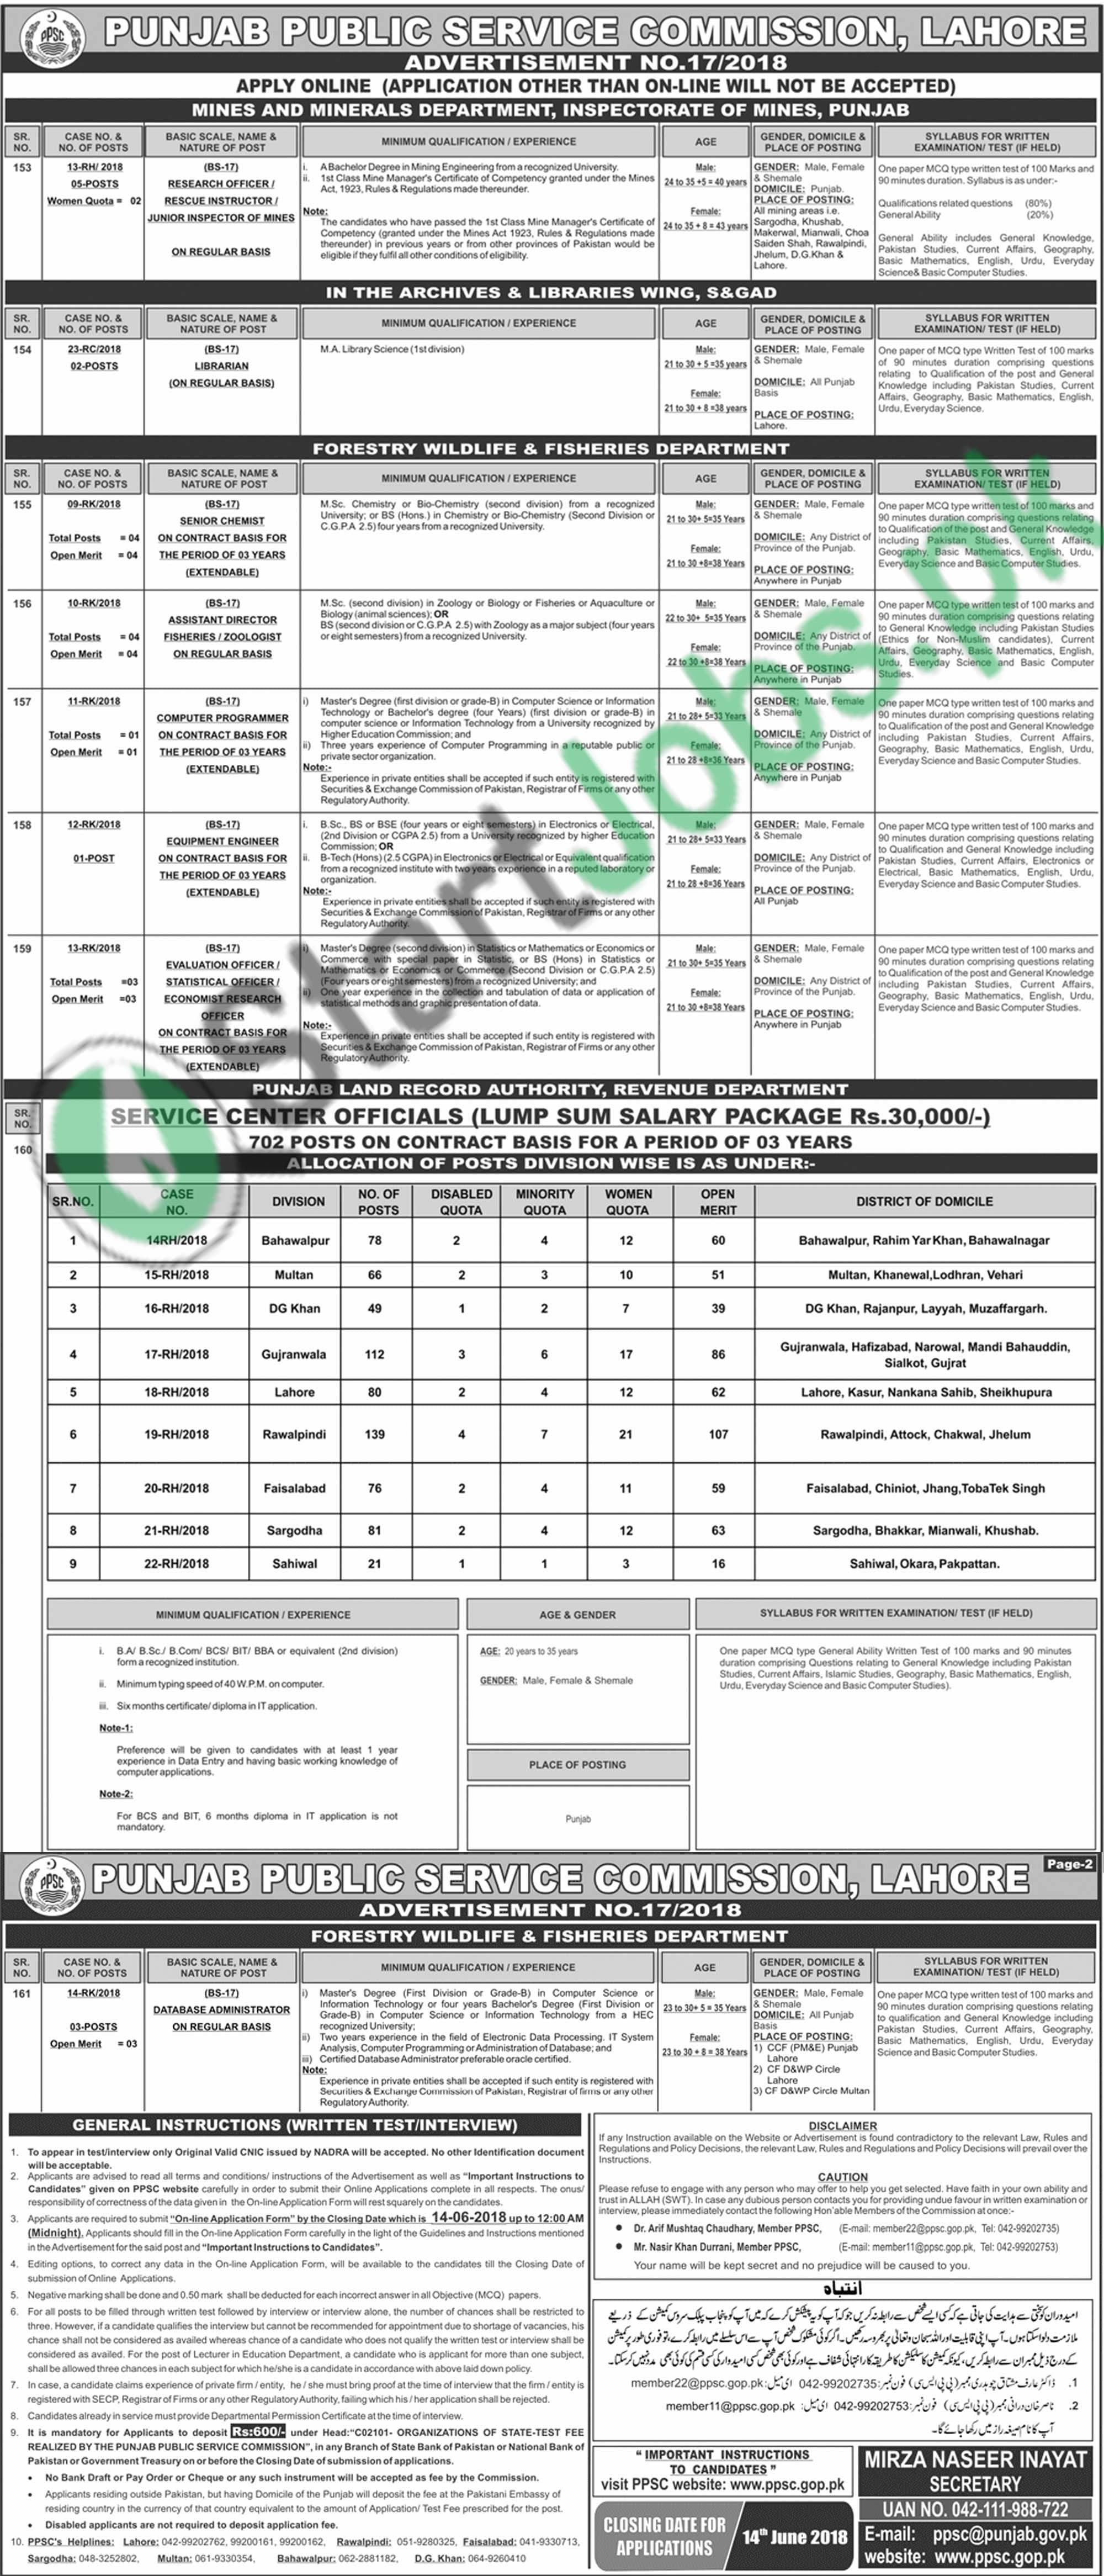 702 Service Center Officials Jobs in Punjab Land Record Authority PPSC 2018 